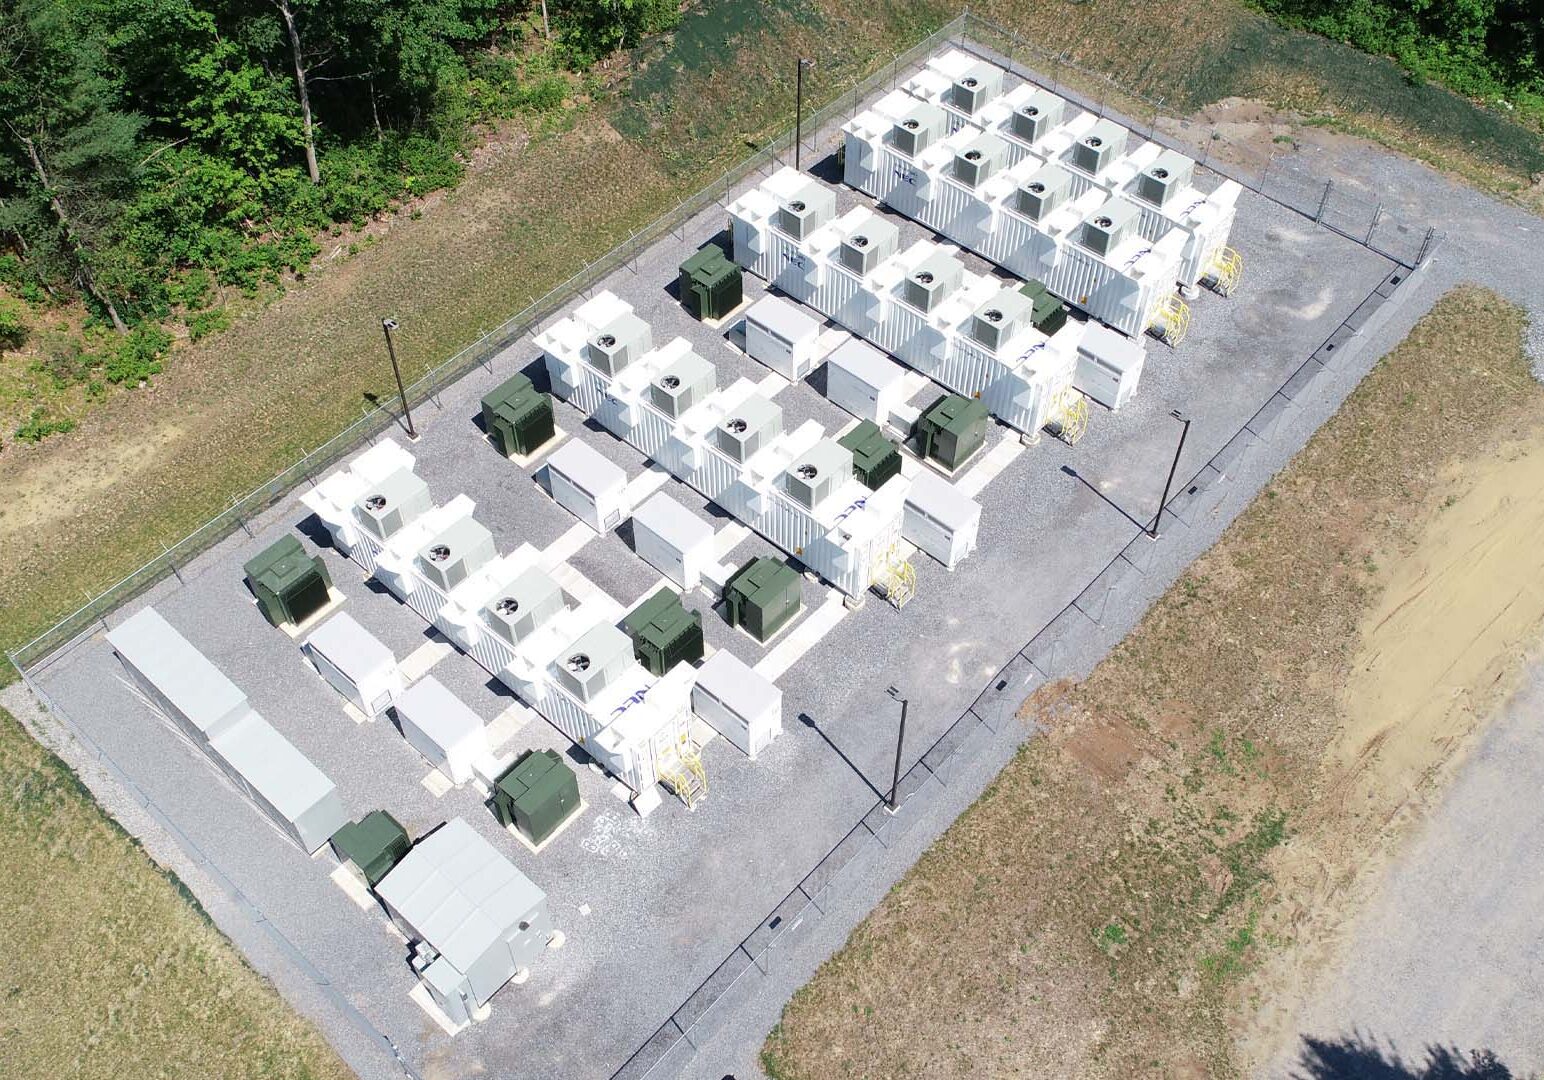 Overview of a storage site.